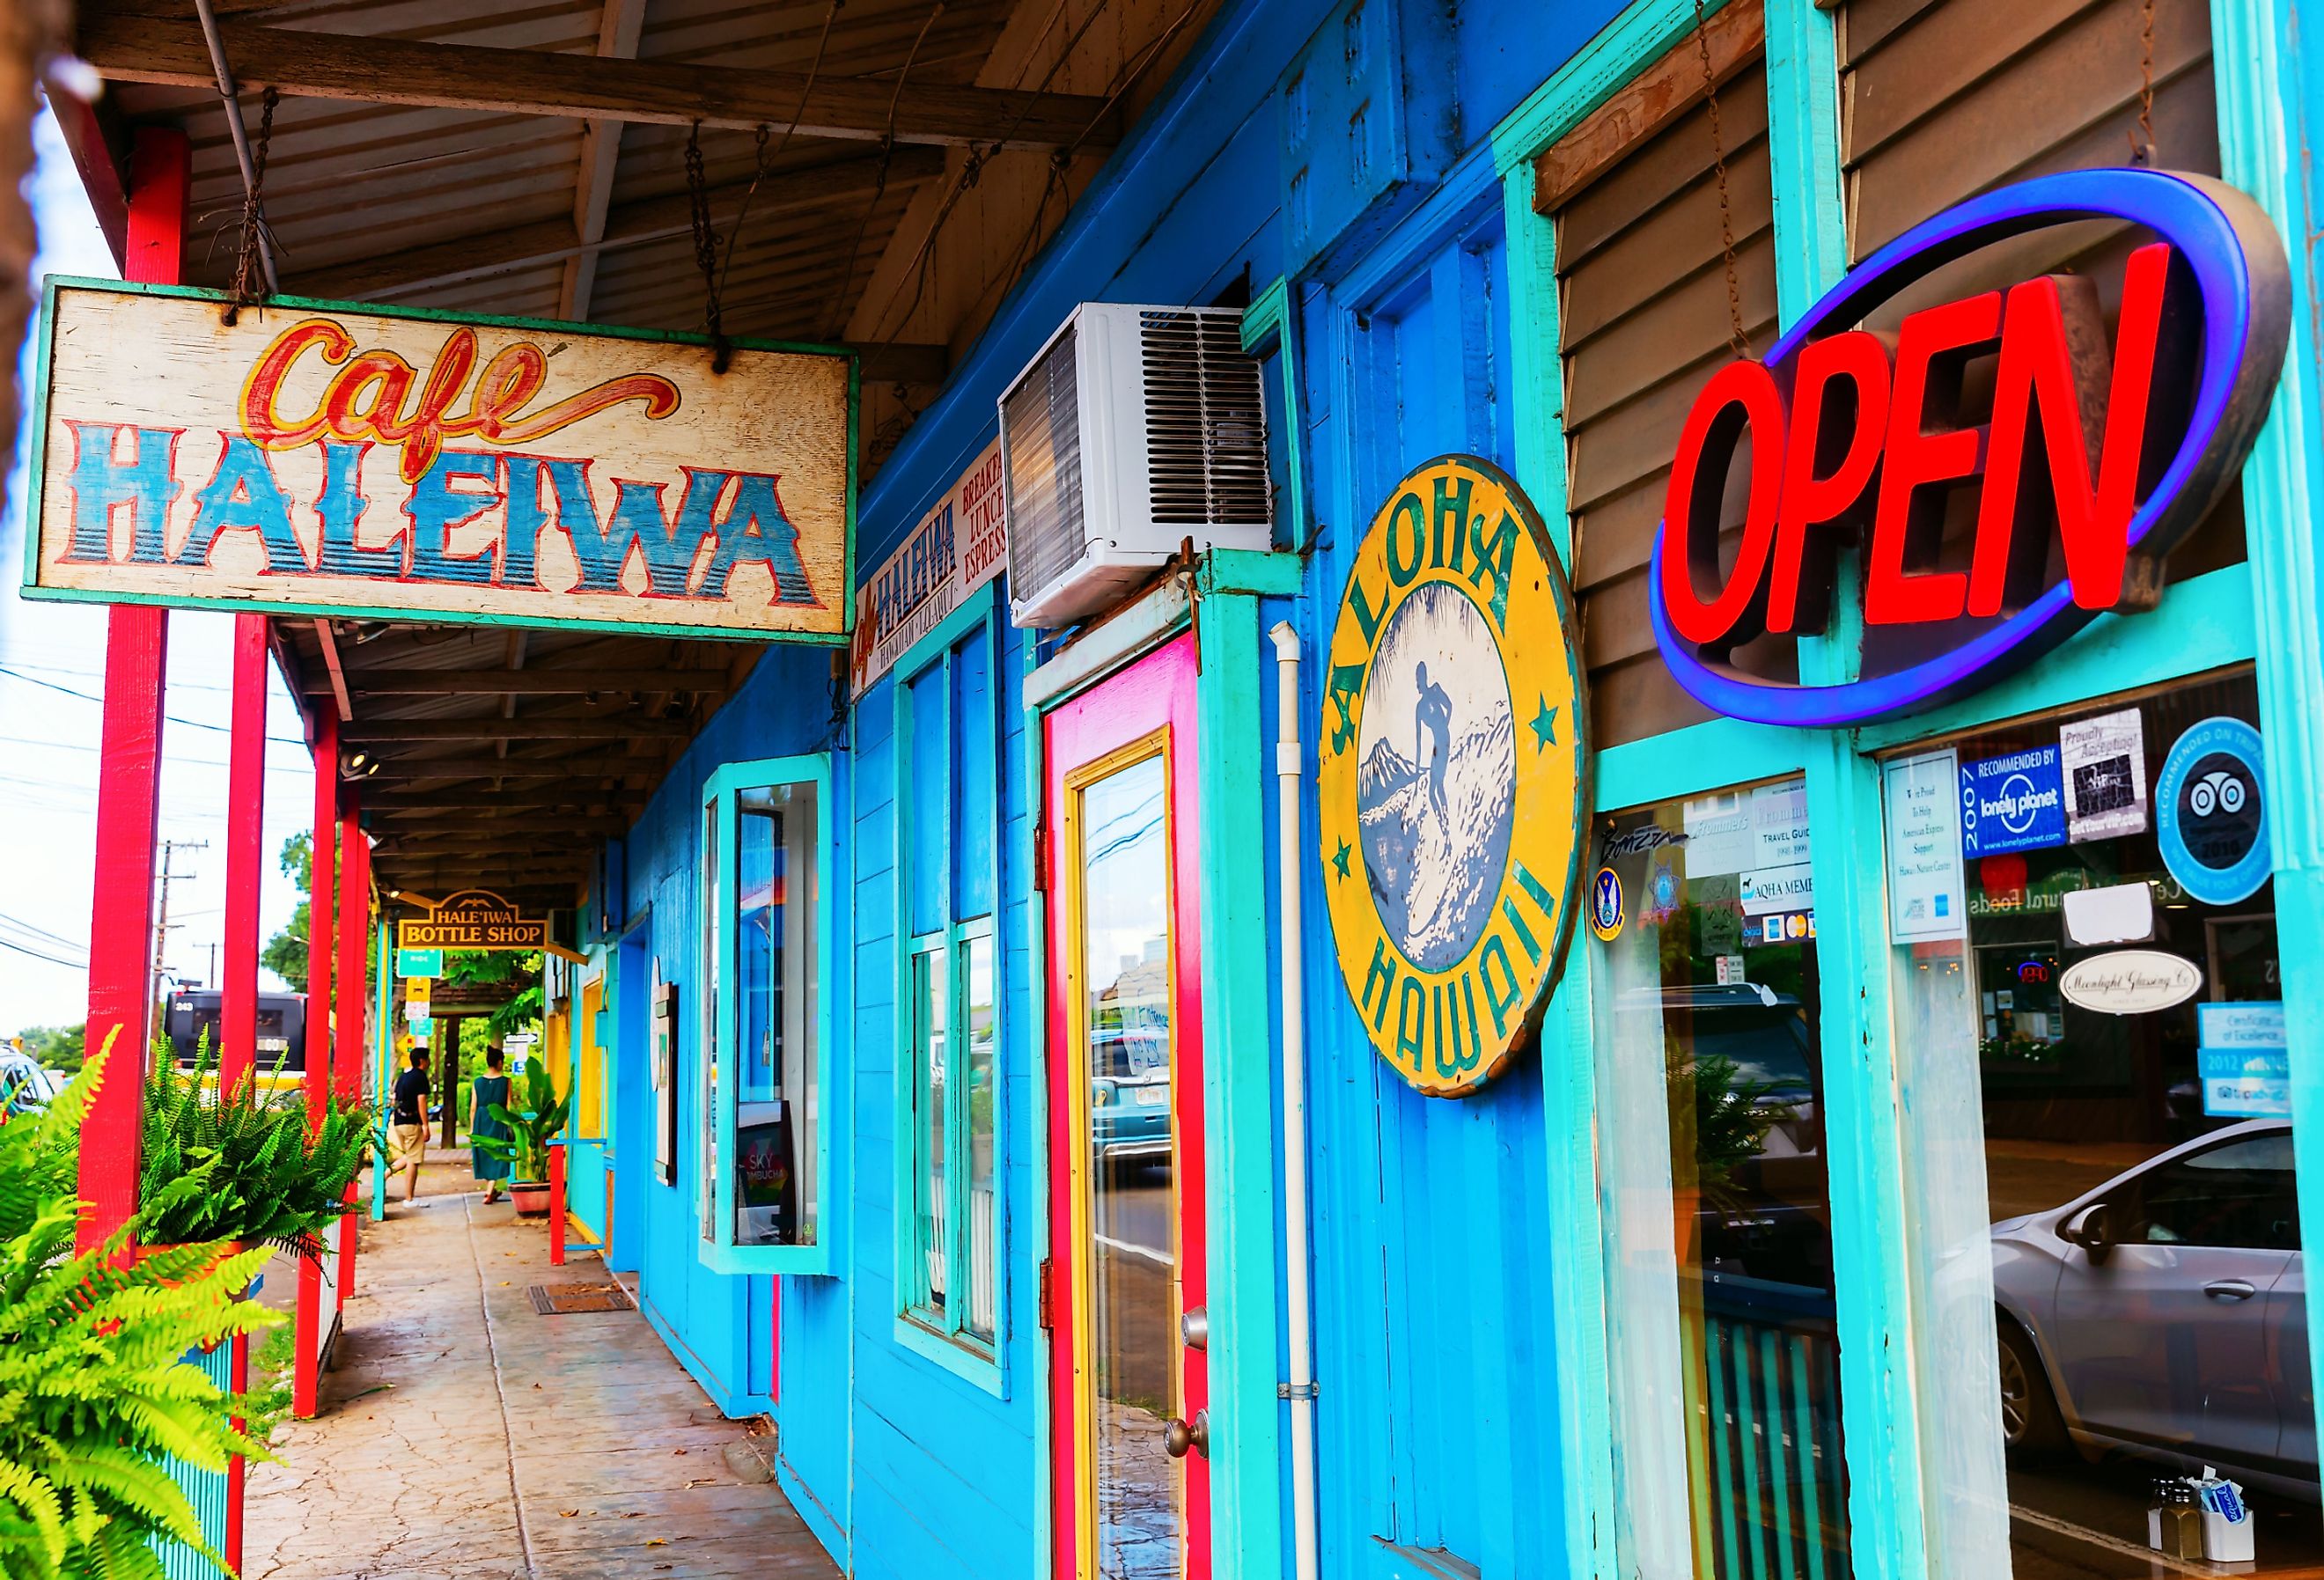 Colorful stores in small town Haleiwa. Image credit Christian Mueller via Shutterstock.